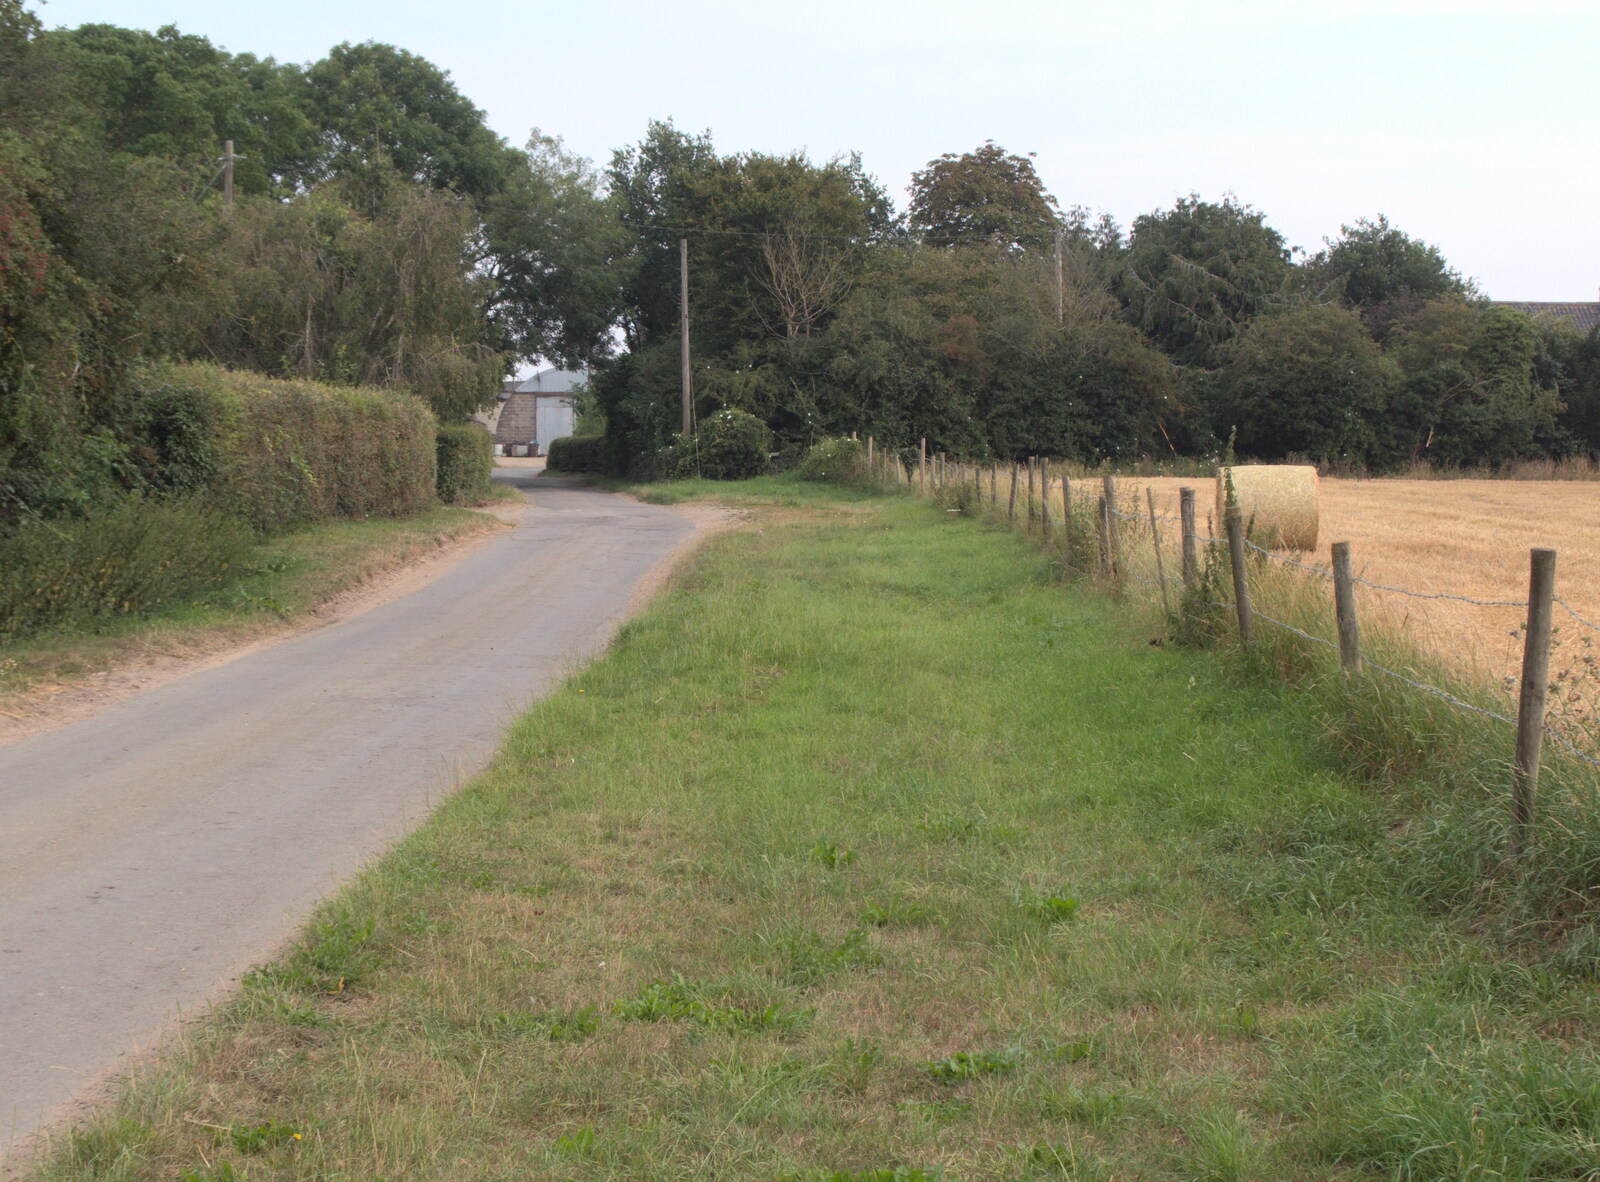 The road to Eye from More Bike Rides, and Marc's Birthday, Brome, Suffolk - 21st August 2020